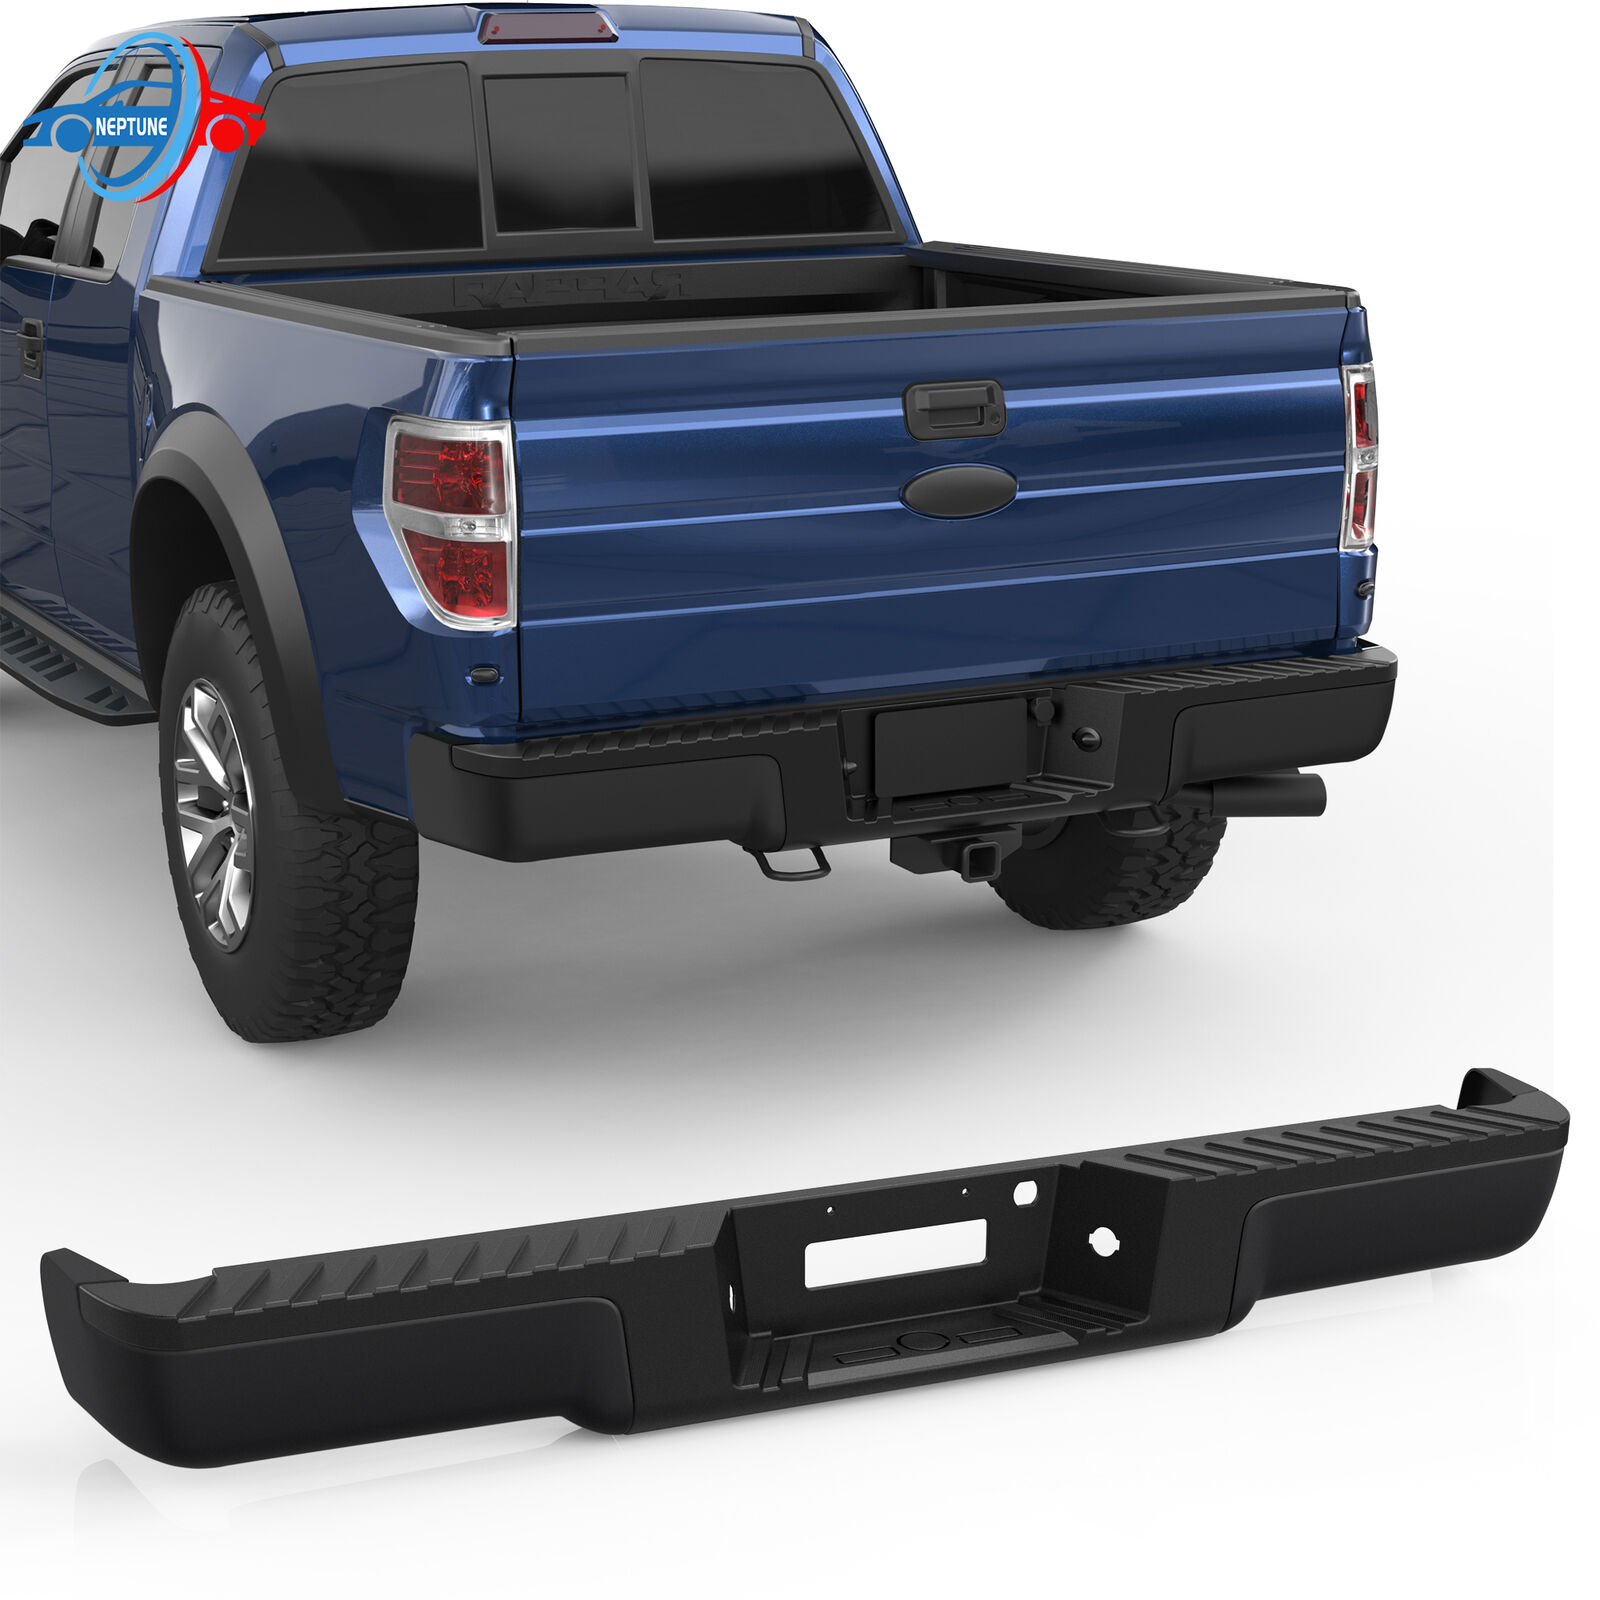 New Black Rear Step Bumper Assy For 2004-2006 Ford F150 Without Sensor Holes